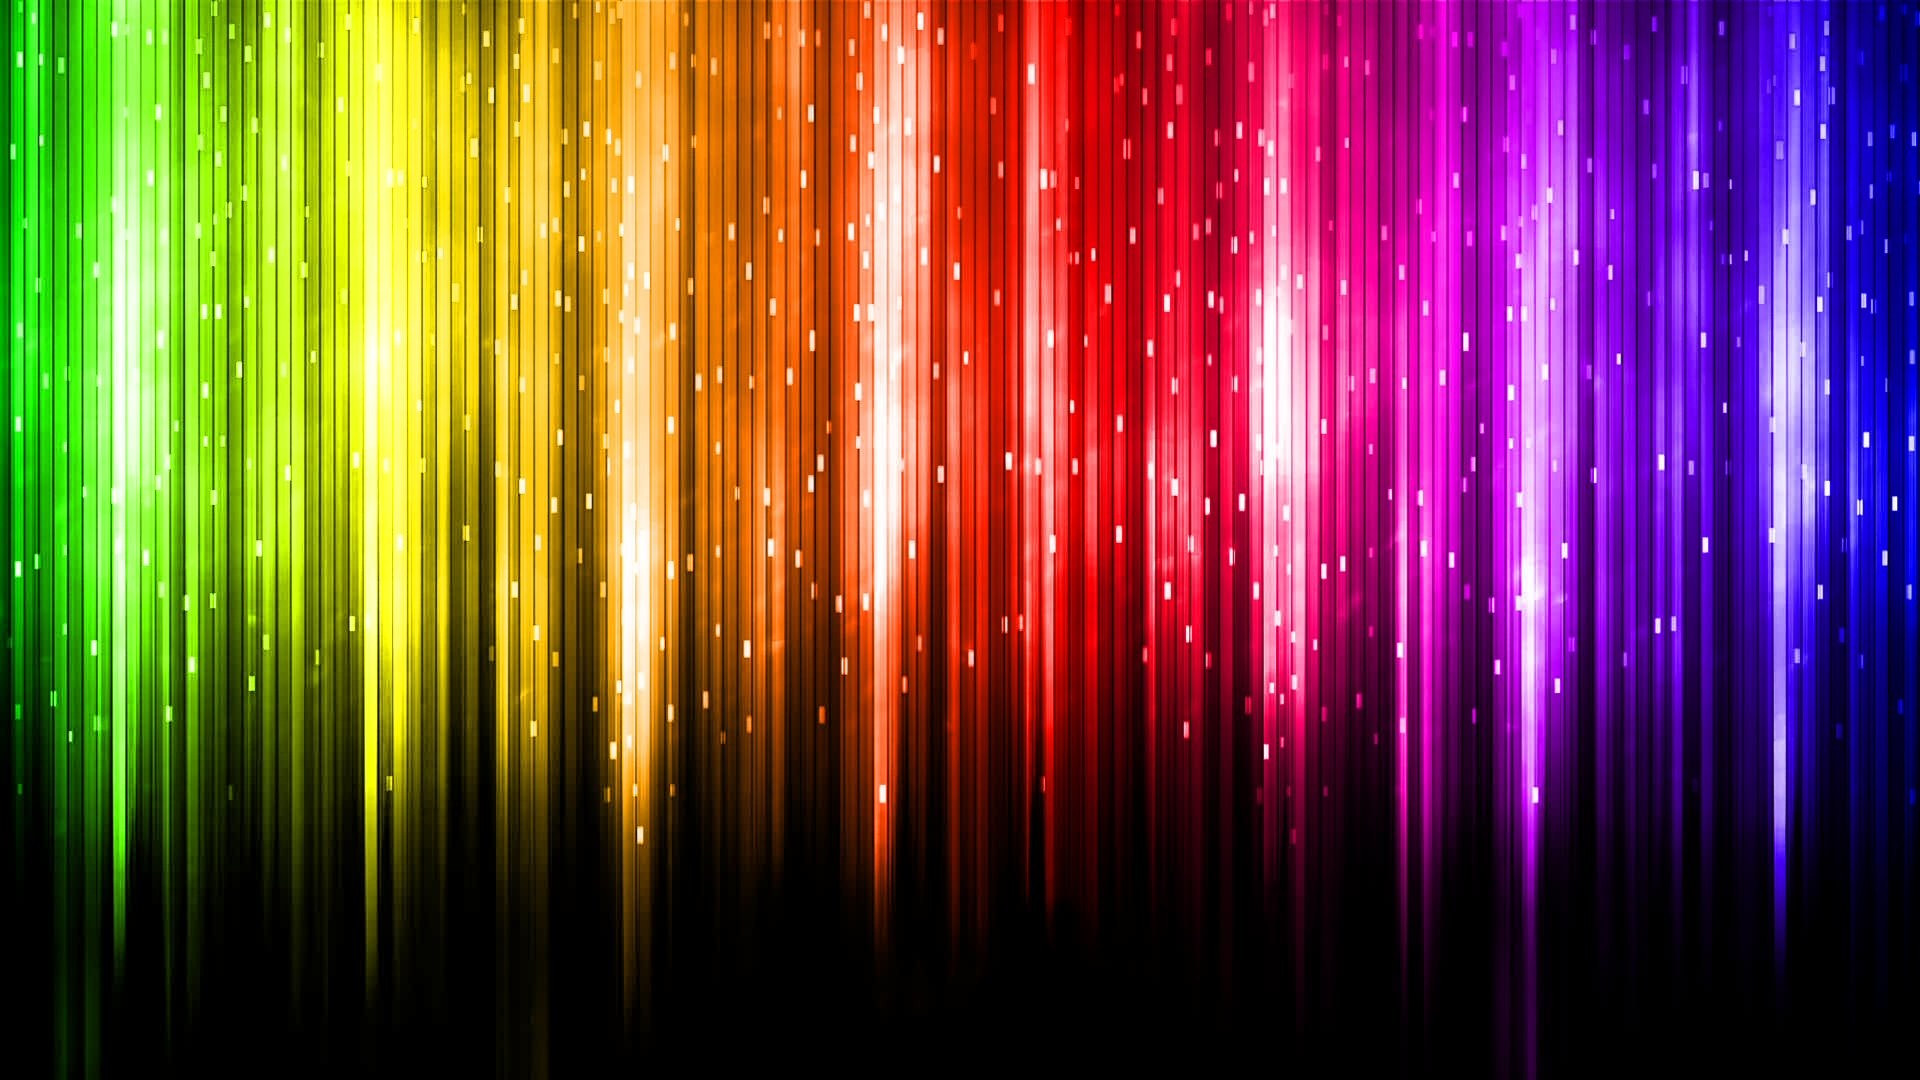 Wallpapers Computer Rainbow Colors with image resolution 1920x1080 pixel. You can make this wallpaper for your Desktop Computer Backgrounds, Mac Wallpapers, Android Lock screen or iPhone Screensavers